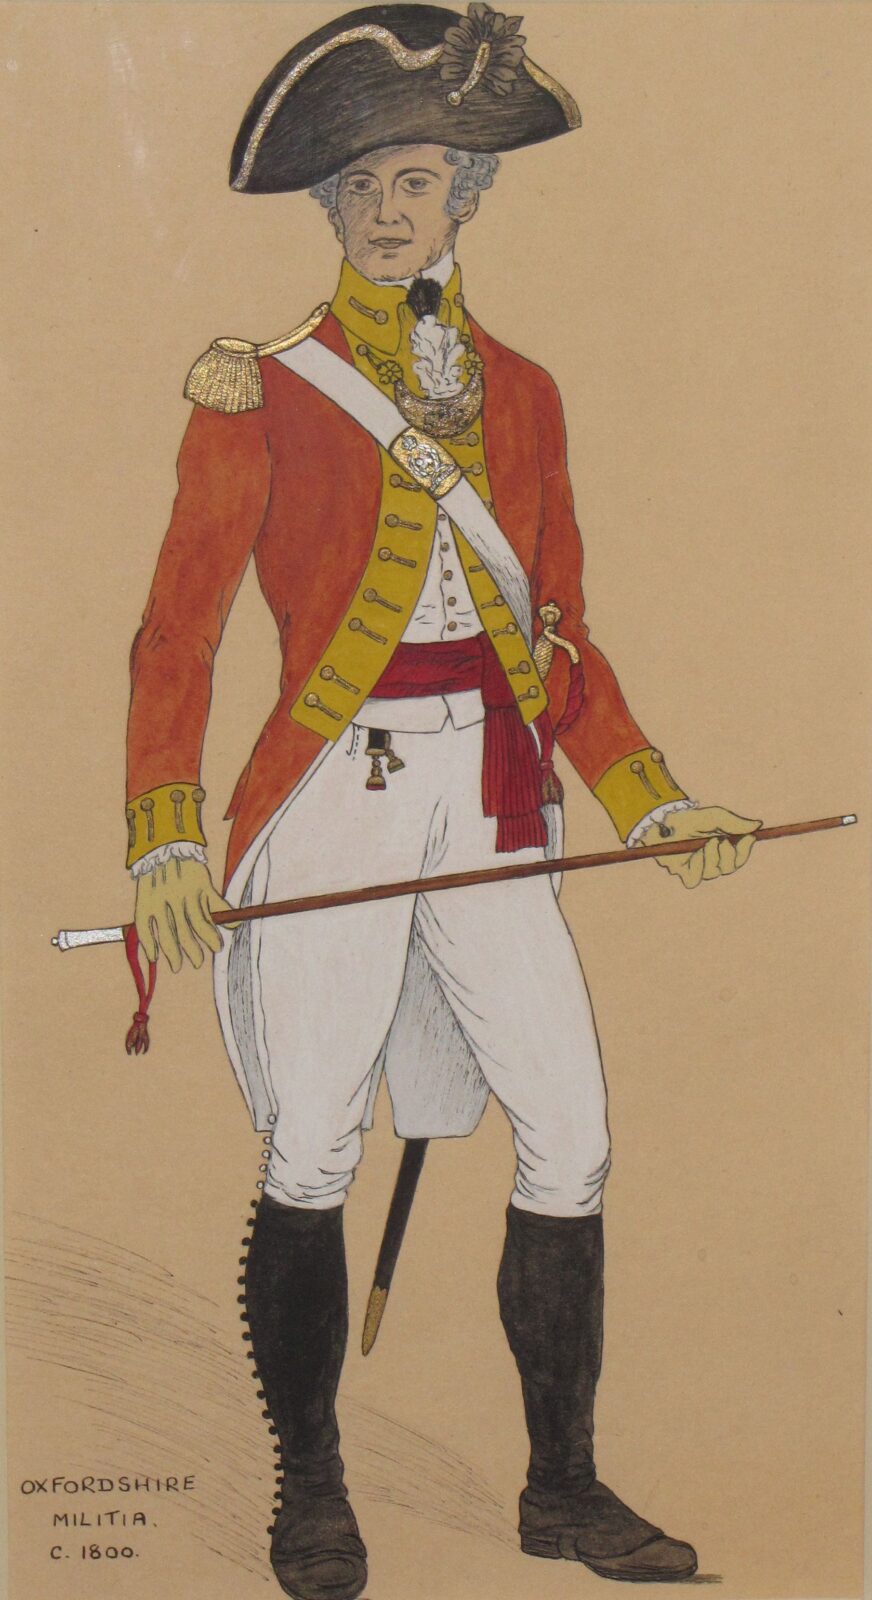 Coloured drawing of an Officer in Captain's Uniform of the Oxfordshire Militia circa 1800, by Joan Corder